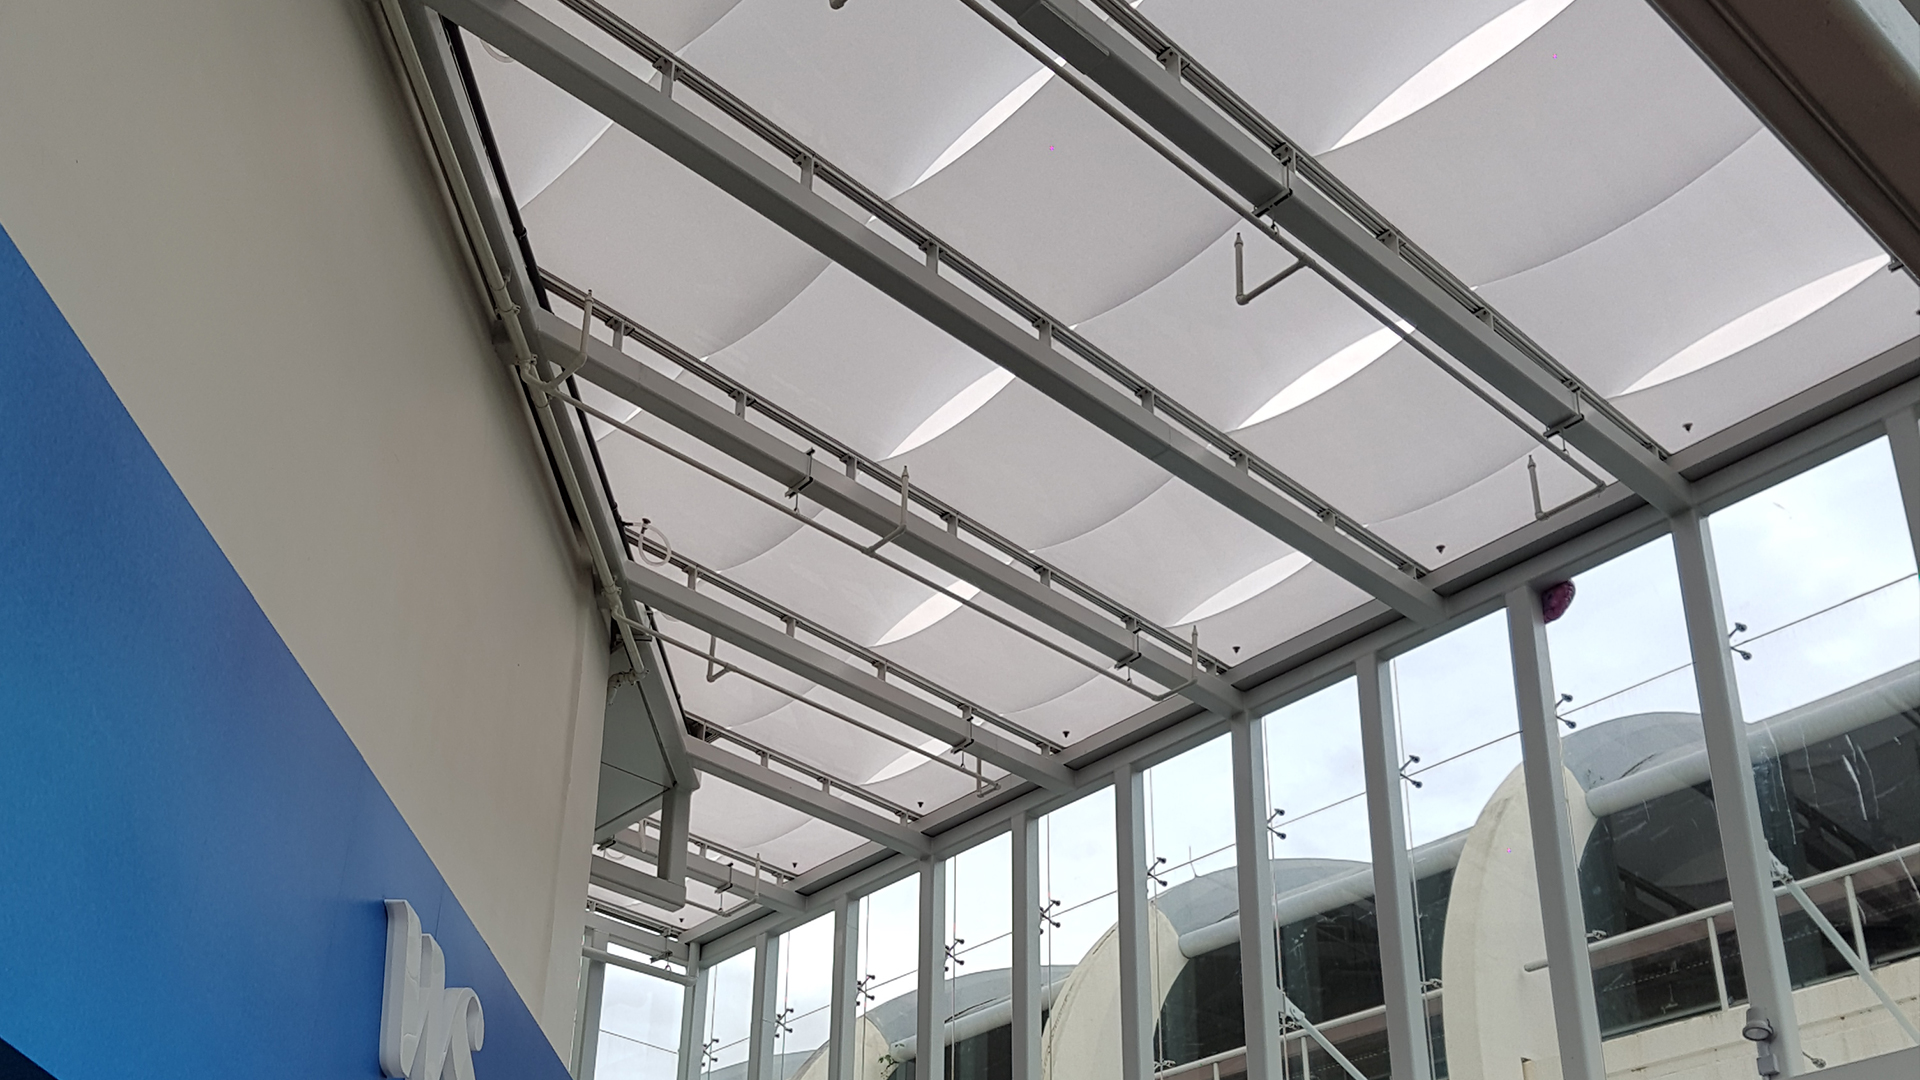 The solution for the connection from Pasir Ris MRT station to White Sands Shopping Mall was a Texlon® ETFE cushion system.